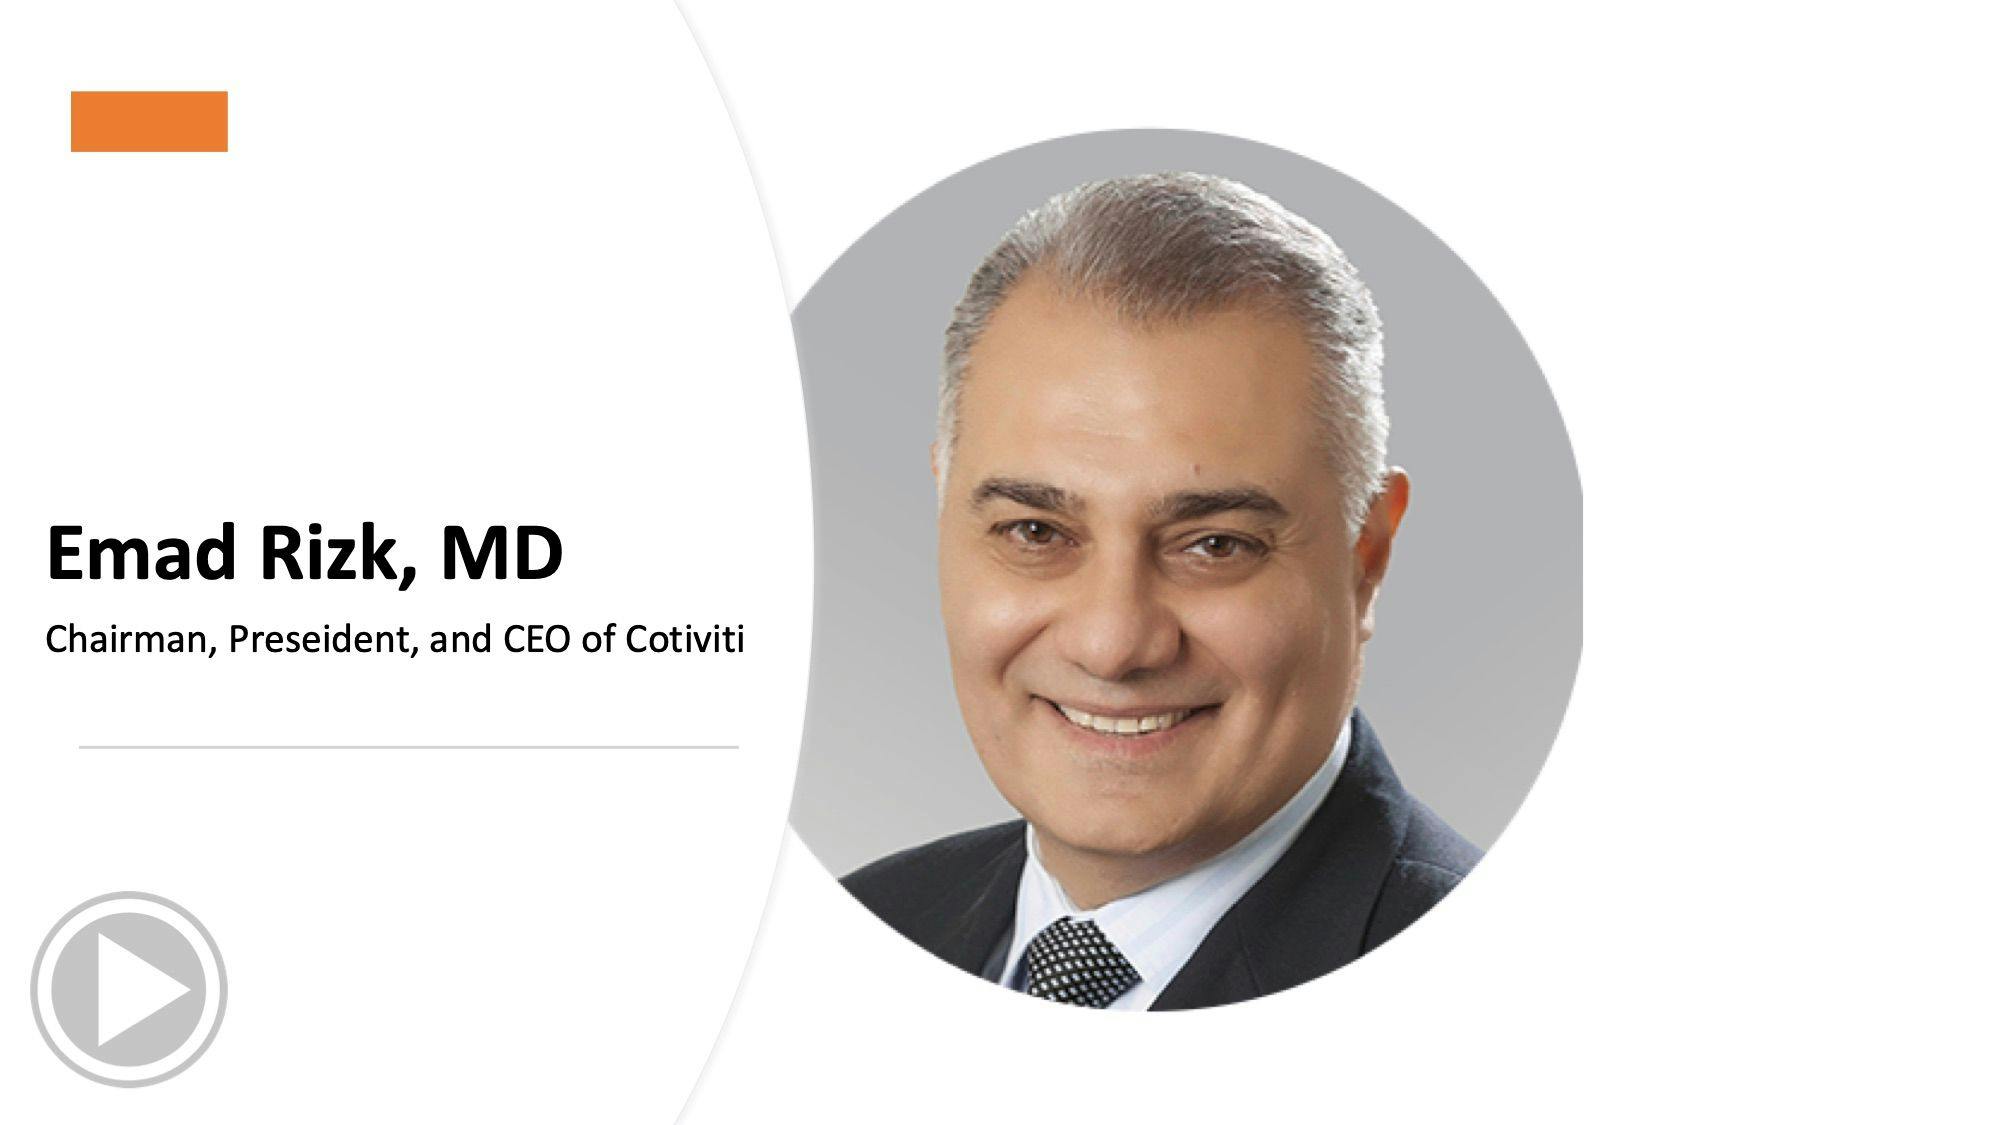 Emad Rizk, MD, gives expert advice